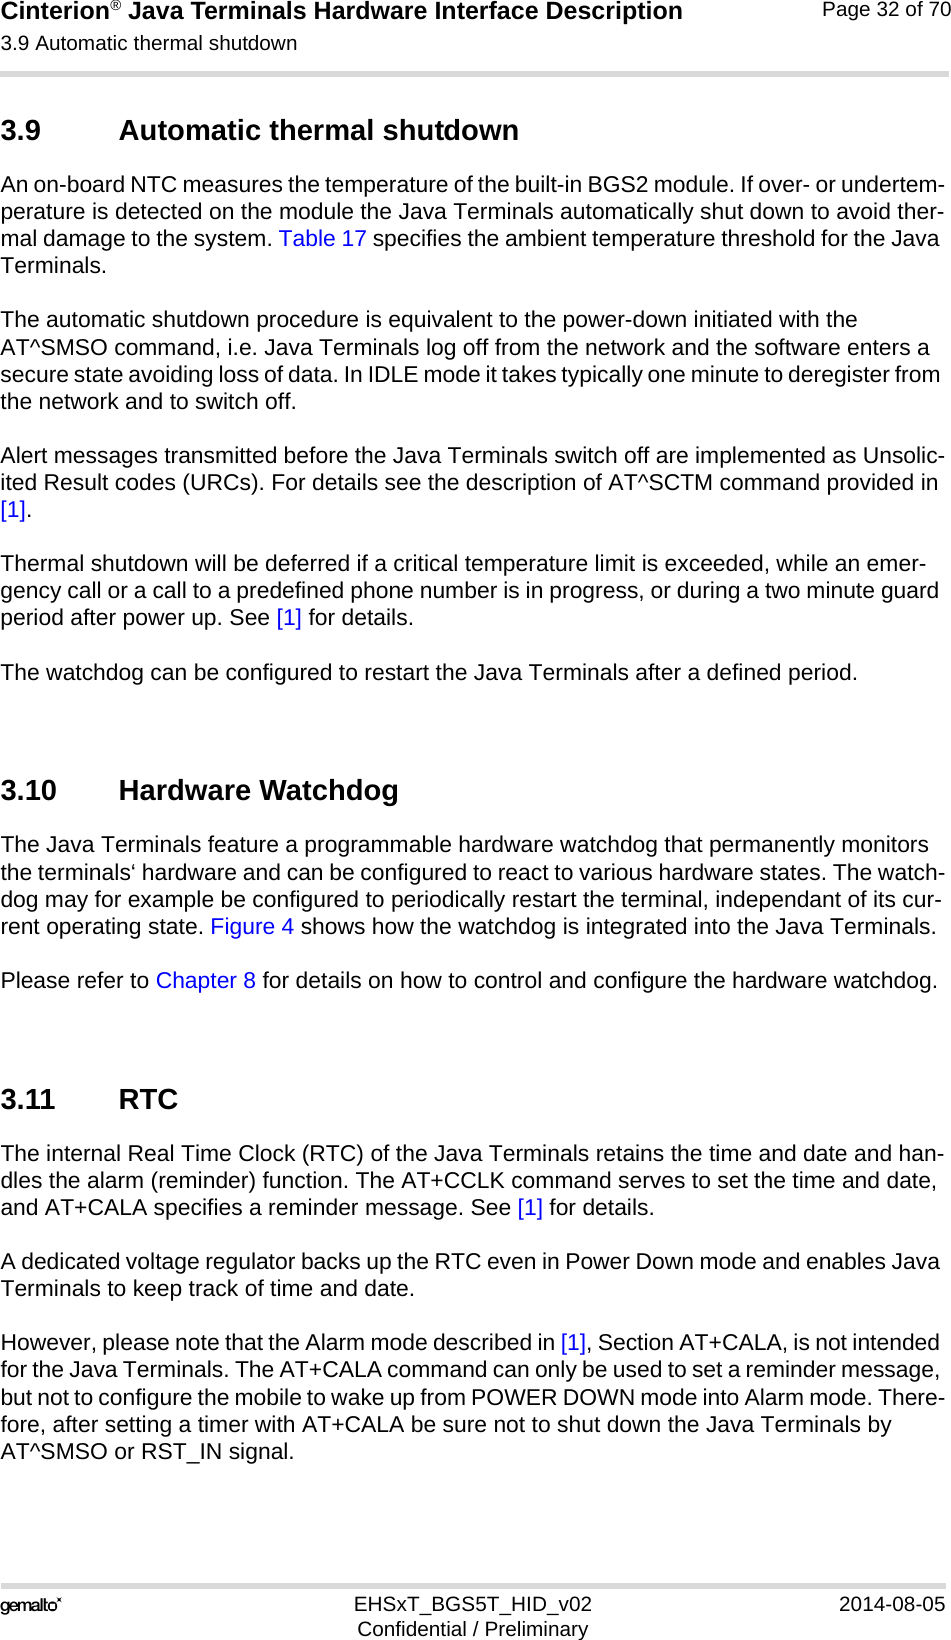 Cinterion® Java Terminals Hardware Interface Description3.9 Automatic thermal shutdown35EHSxT_BGS5T_HID_v02 2014-08-05Confidential / PreliminaryPage 32 of 703.9 Automatic thermal shutdownAn on-board NTC measures the temperature of the built-in BGS2 module. If over- or undertem-perature is detected on the module the Java Terminals automatically shut down to avoid ther-mal damage to the system. Table 17 specifies the ambient temperature threshold for the Java Terminals. The automatic shutdown procedure is equivalent to the power-down initiated with the AT^SMSO command, i.e. Java Terminals log off from the network and the software enters a secure state avoiding loss of data. In IDLE mode it takes typically one minute to deregister from the network and to switch off. Alert messages transmitted before the Java Terminals switch off are implemented as Unsolic-ited Result codes (URCs). For details see the description of AT^SCTM command provided in [1]. Thermal shutdown will be deferred if a critical temperature limit is exceeded, while an emer-gency call or a call to a predefined phone number is in progress, or during a two minute guard period after power up. See [1] for details.The watchdog can be configured to restart the Java Terminals after a defined period.3.10 Hardware WatchdogThe Java Terminals feature a programmable hardware watchdog that permanently monitors the terminals‘ hardware and can be configured to react to various hardware states. The watch-dog may for example be configured to periodically restart the terminal, independant of its cur-rent operating state. Figure 4 shows how the watchdog is integrated into the Java Terminals.Please refer to Chapter 8 for details on how to control and configure the hardware watchdog.3.11 RTCThe internal Real Time Clock (RTC) of the Java Terminals retains the time and date and han-dles the alarm (reminder) function. The AT+CCLK command serves to set the time and date, and AT+CALA specifies a reminder message. See [1] for details. A dedicated voltage regulator backs up the RTC even in Power Down mode and enables Java Terminals to keep track of time and date. However, please note that the Alarm mode described in [1], Section AT+CALA, is not intended for the Java Terminals. The AT+CALA command can only be used to set a reminder message, but not to configure the mobile to wake up from POWER DOWN mode into Alarm mode. There-fore, after setting a timer with AT+CALA be sure not to shut down the Java Terminals by AT^SMSO or RST_IN signal.